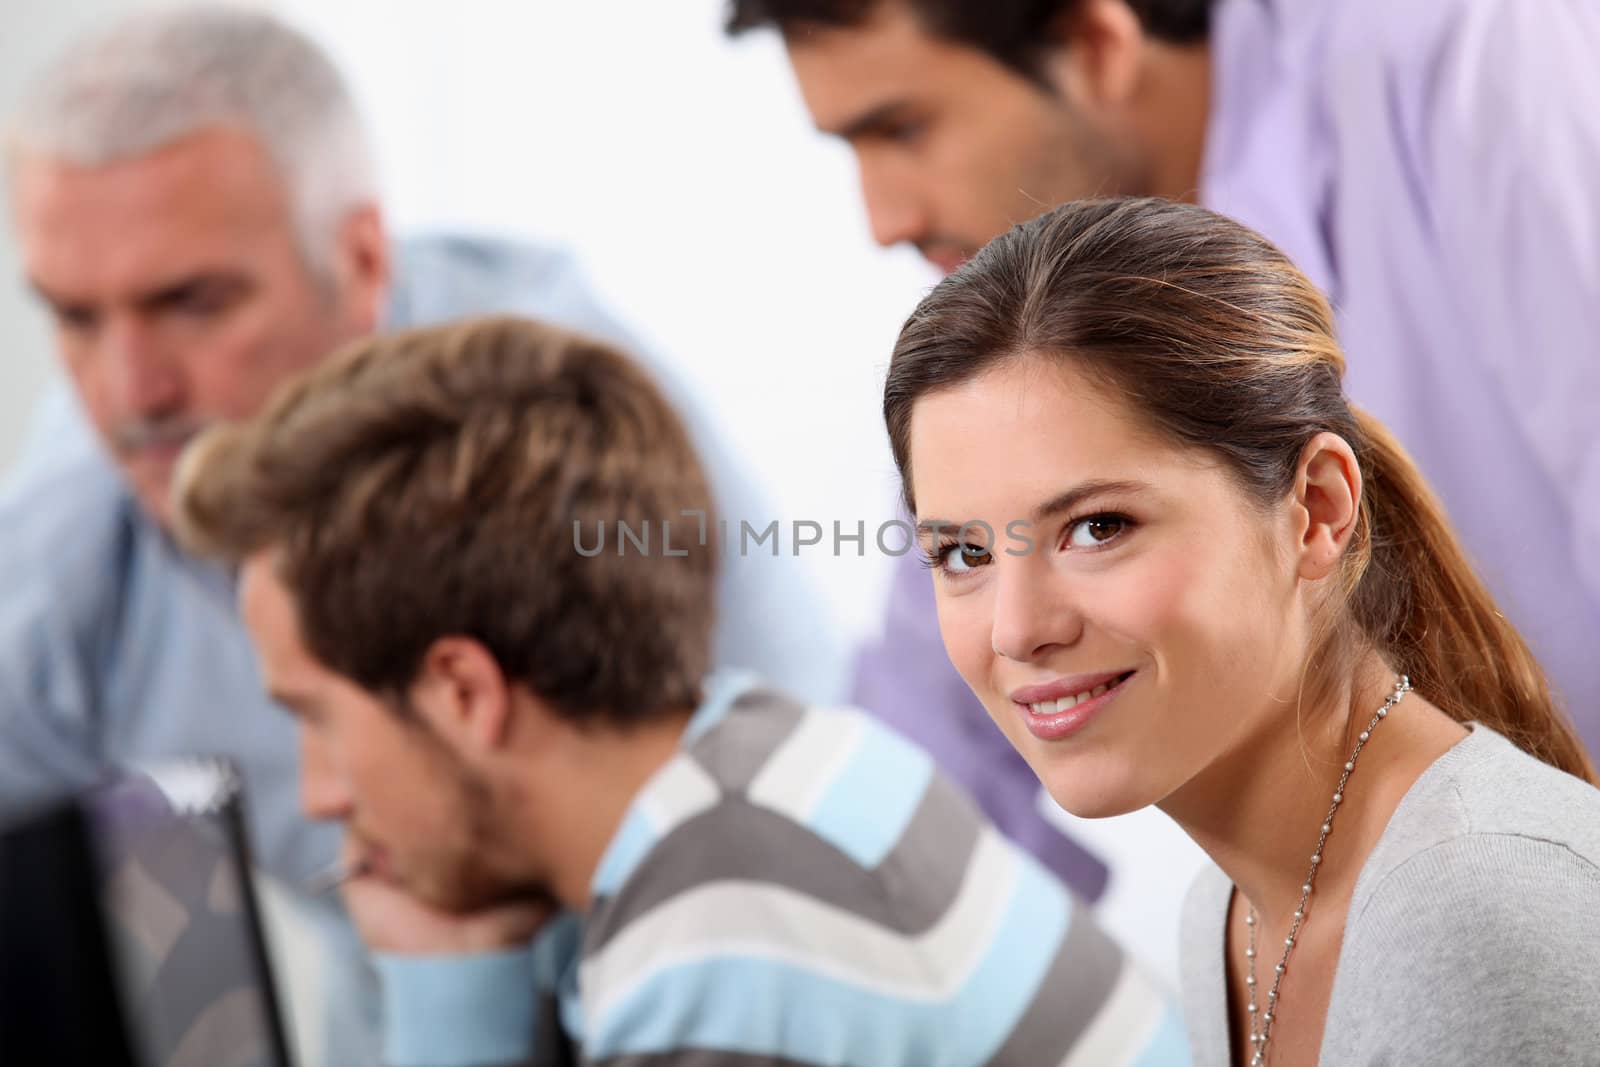 Smiling young woman with male colleagues out of focus in the background